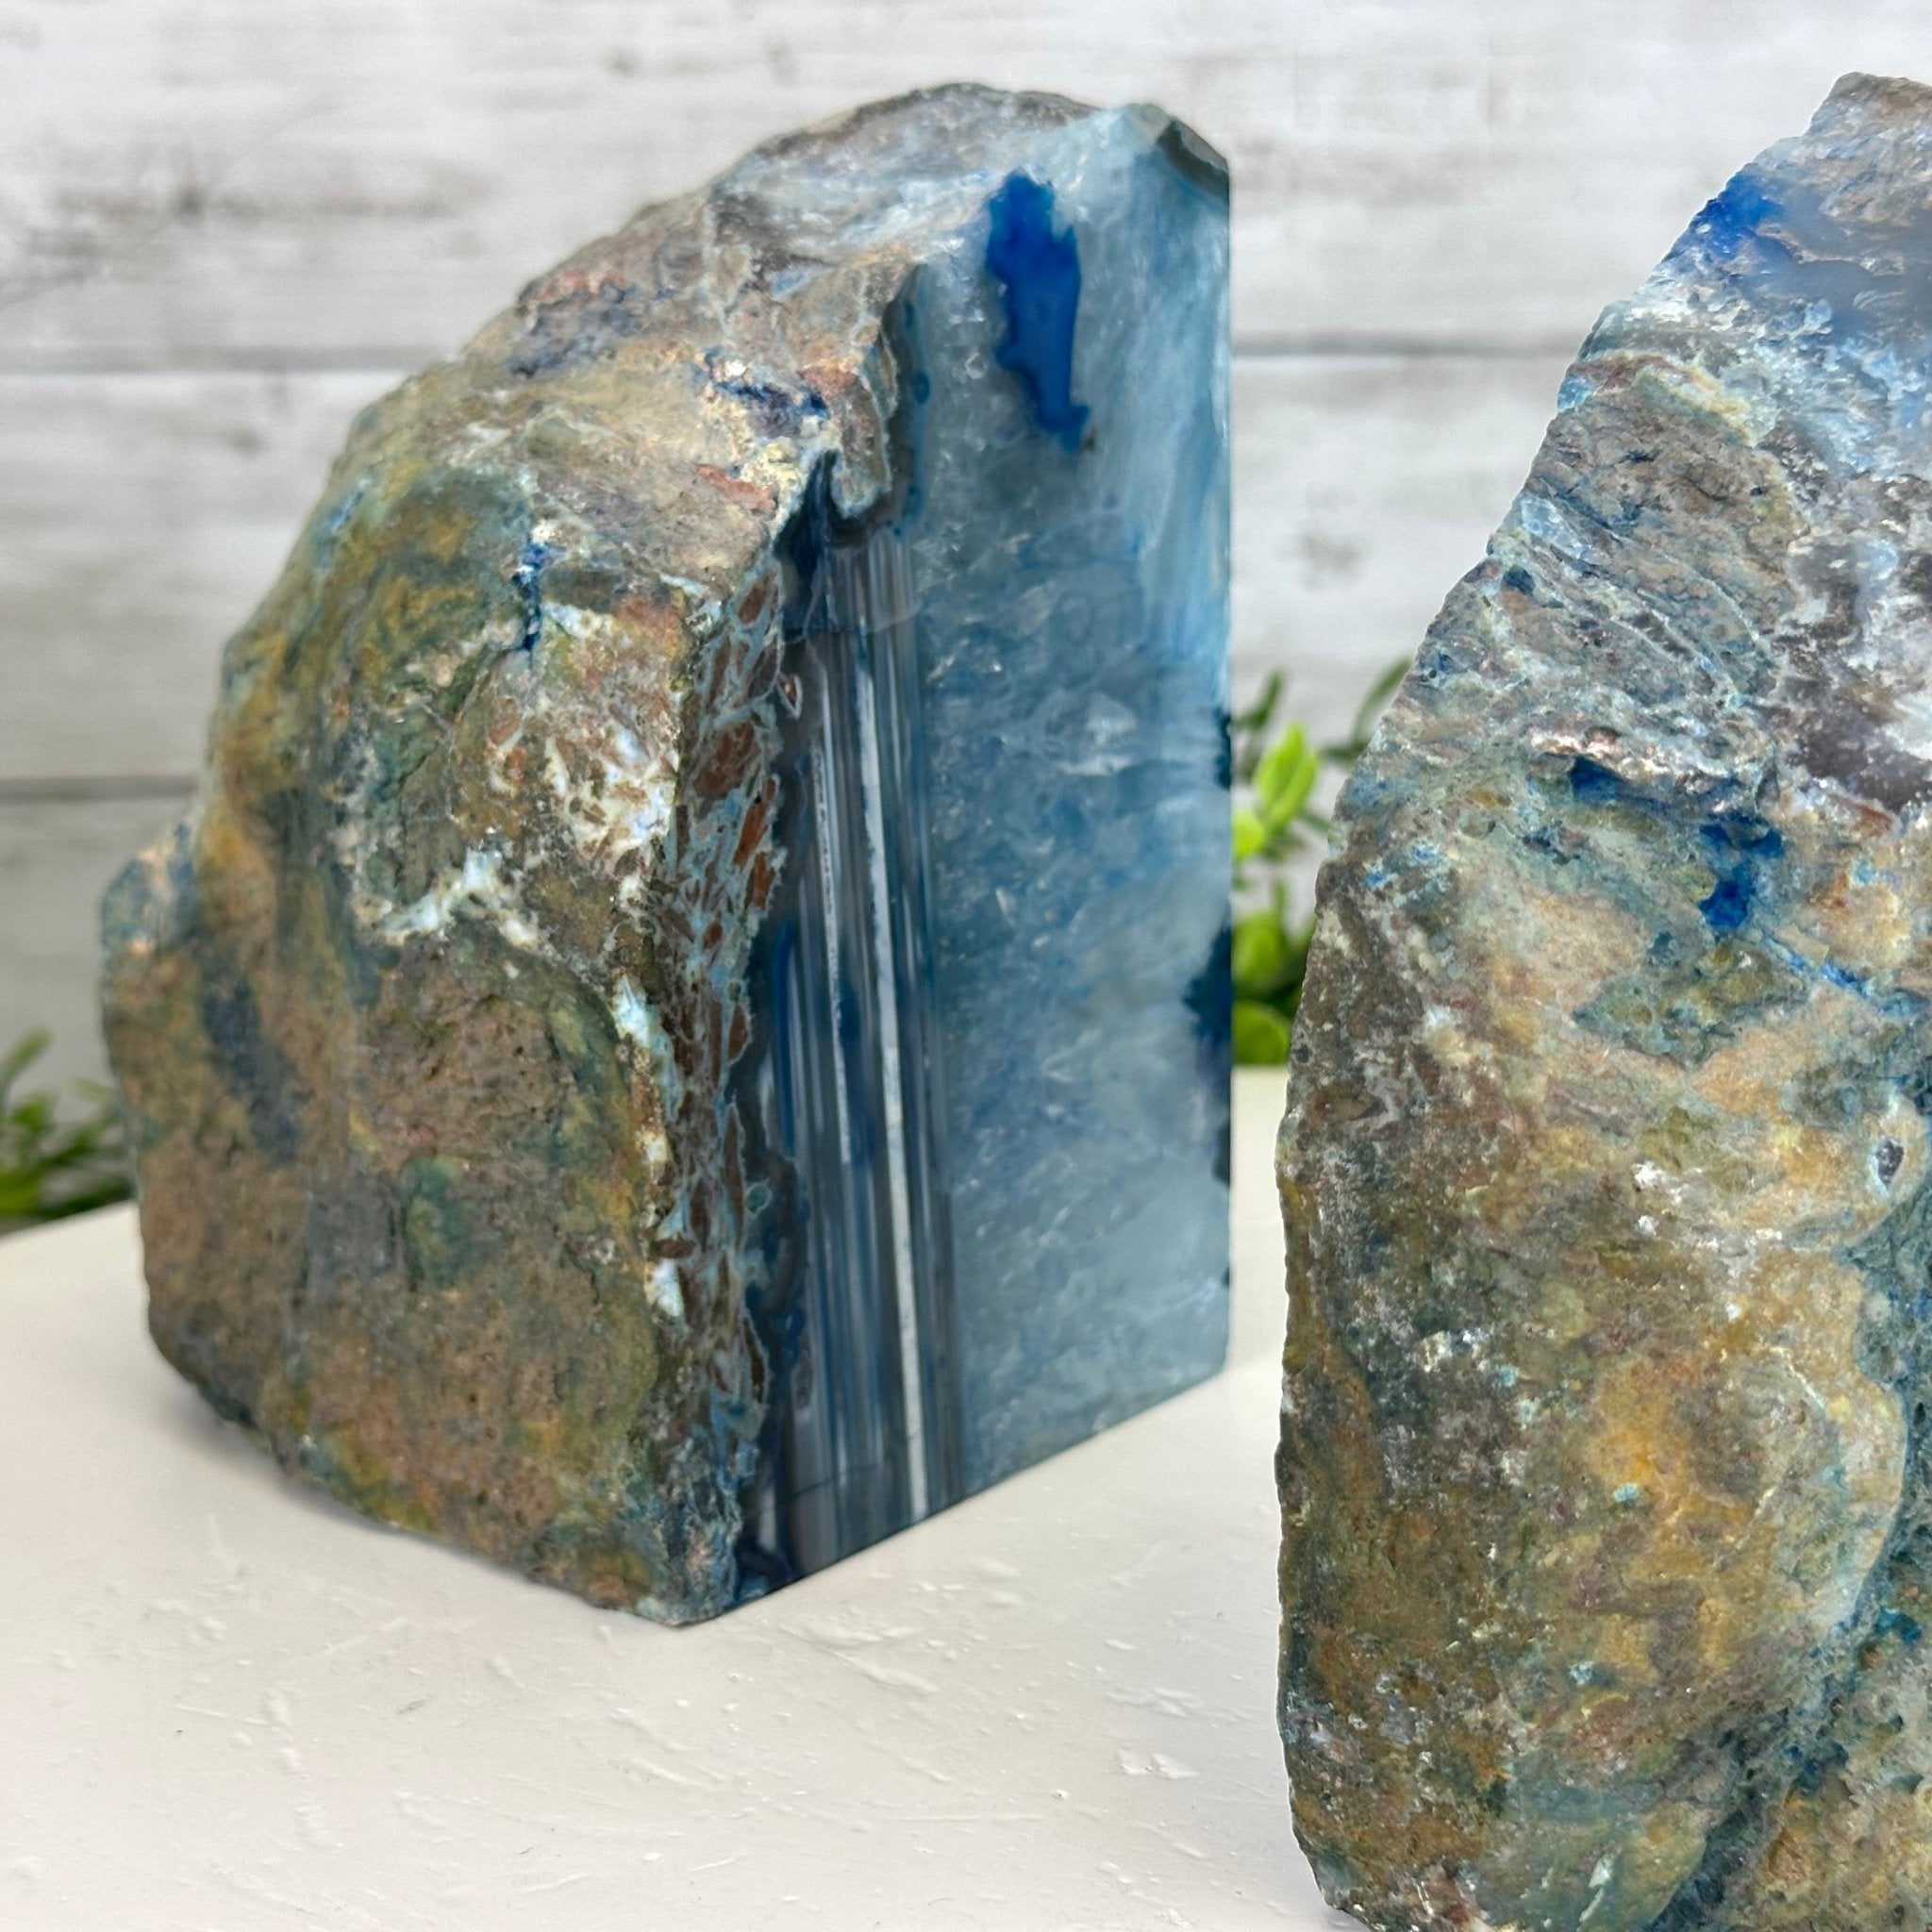 Blue Dyed Brazilian Agate Stone Bookends, 9.4 lbs & 5.5" tall #5151BL-039 - Brazil GemsBrazil GemsBlue Dyed Brazilian Agate Stone Bookends, 9.4 lbs & 5.5" tall #5151BL-039Bookends5151BL-039